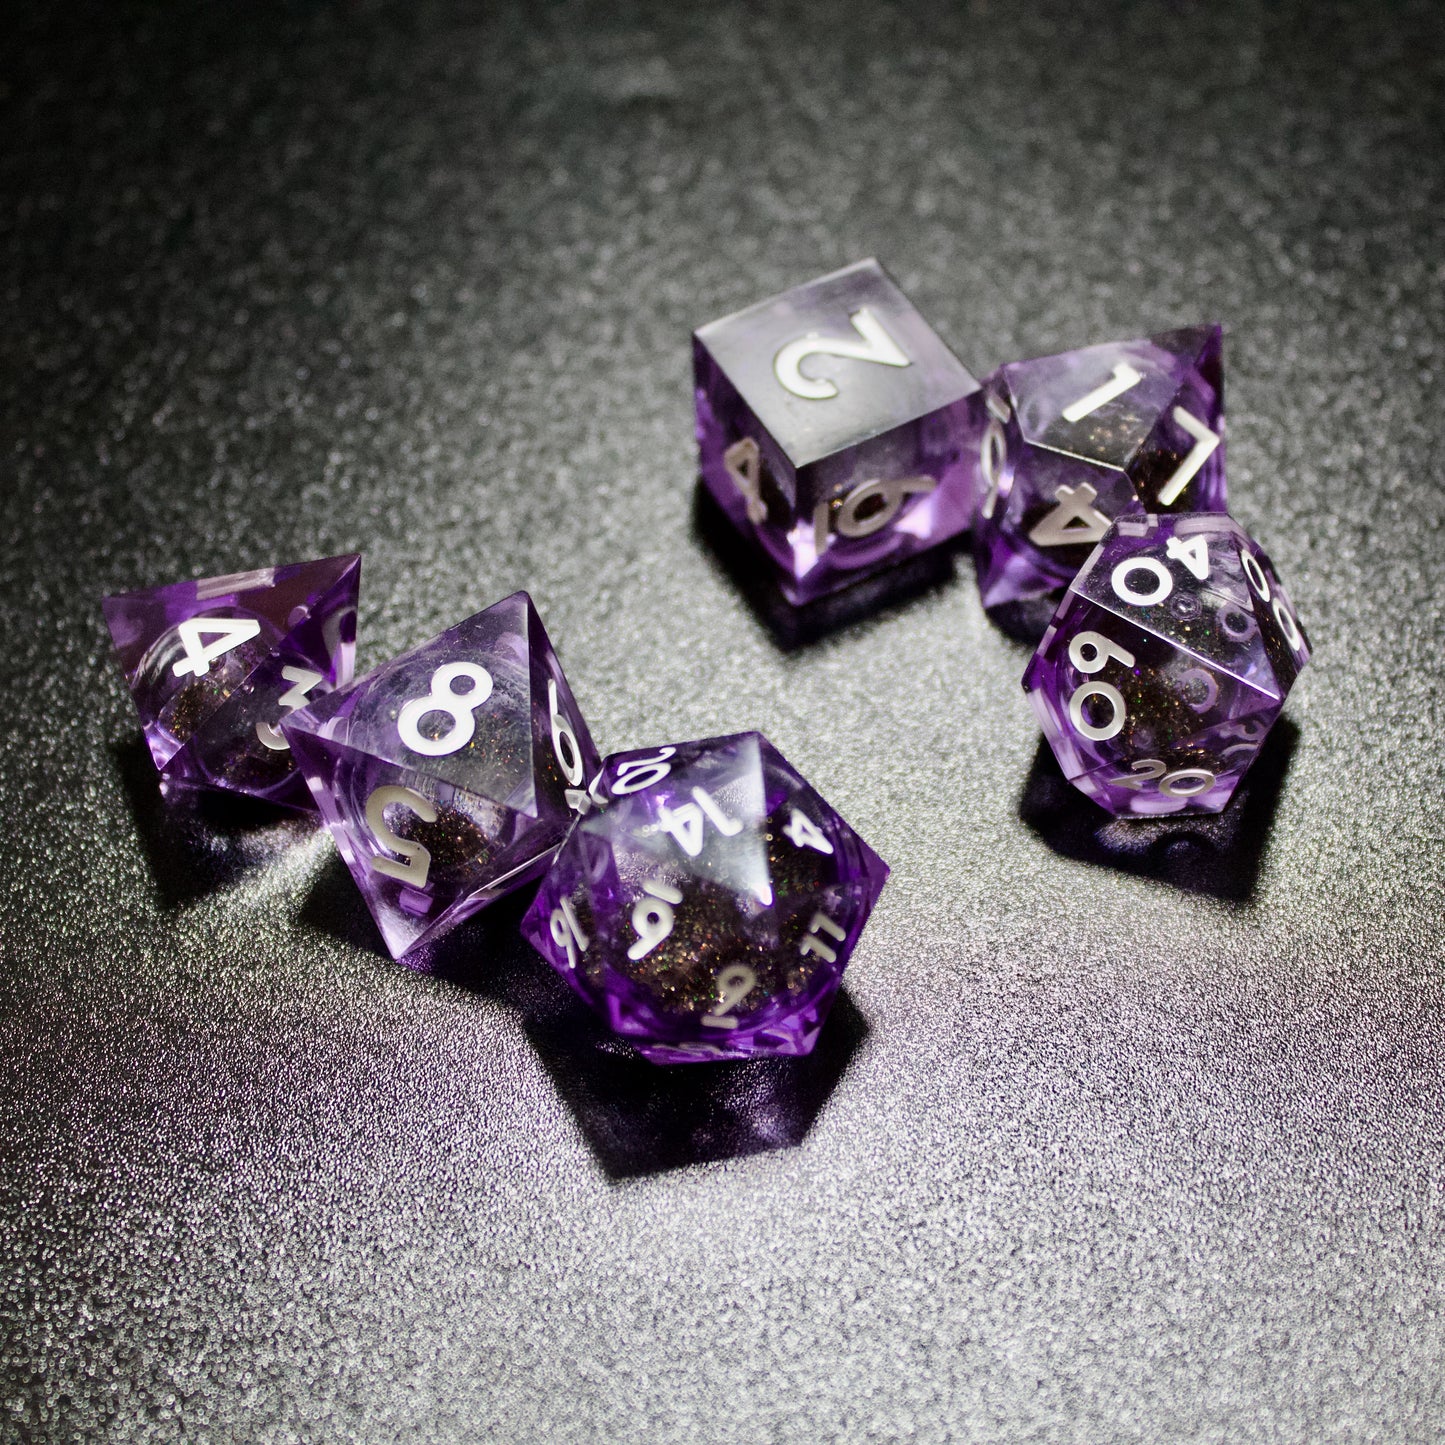 Liquid core sharp edge dnd, TTRPG dice set, dice goblin and critters, role playing games